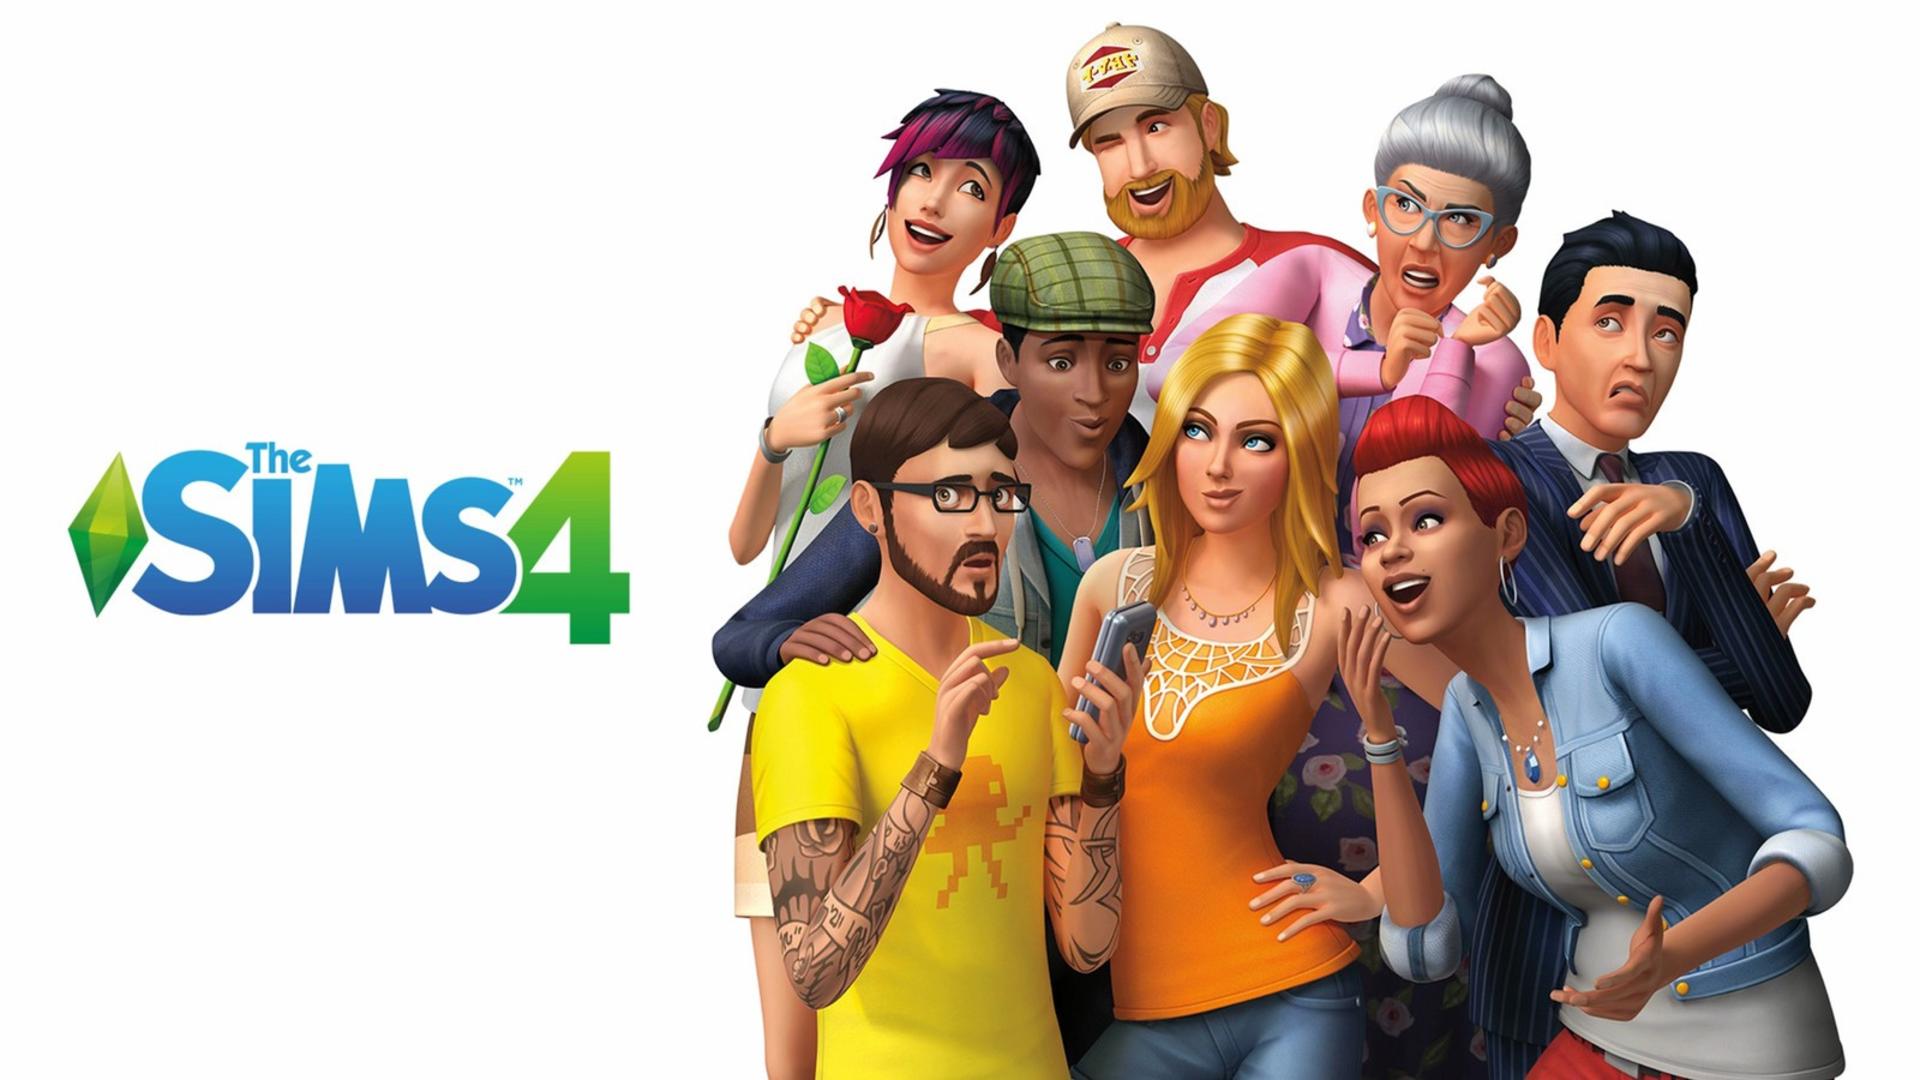 sims 4 all dlc free download 2018 torrent